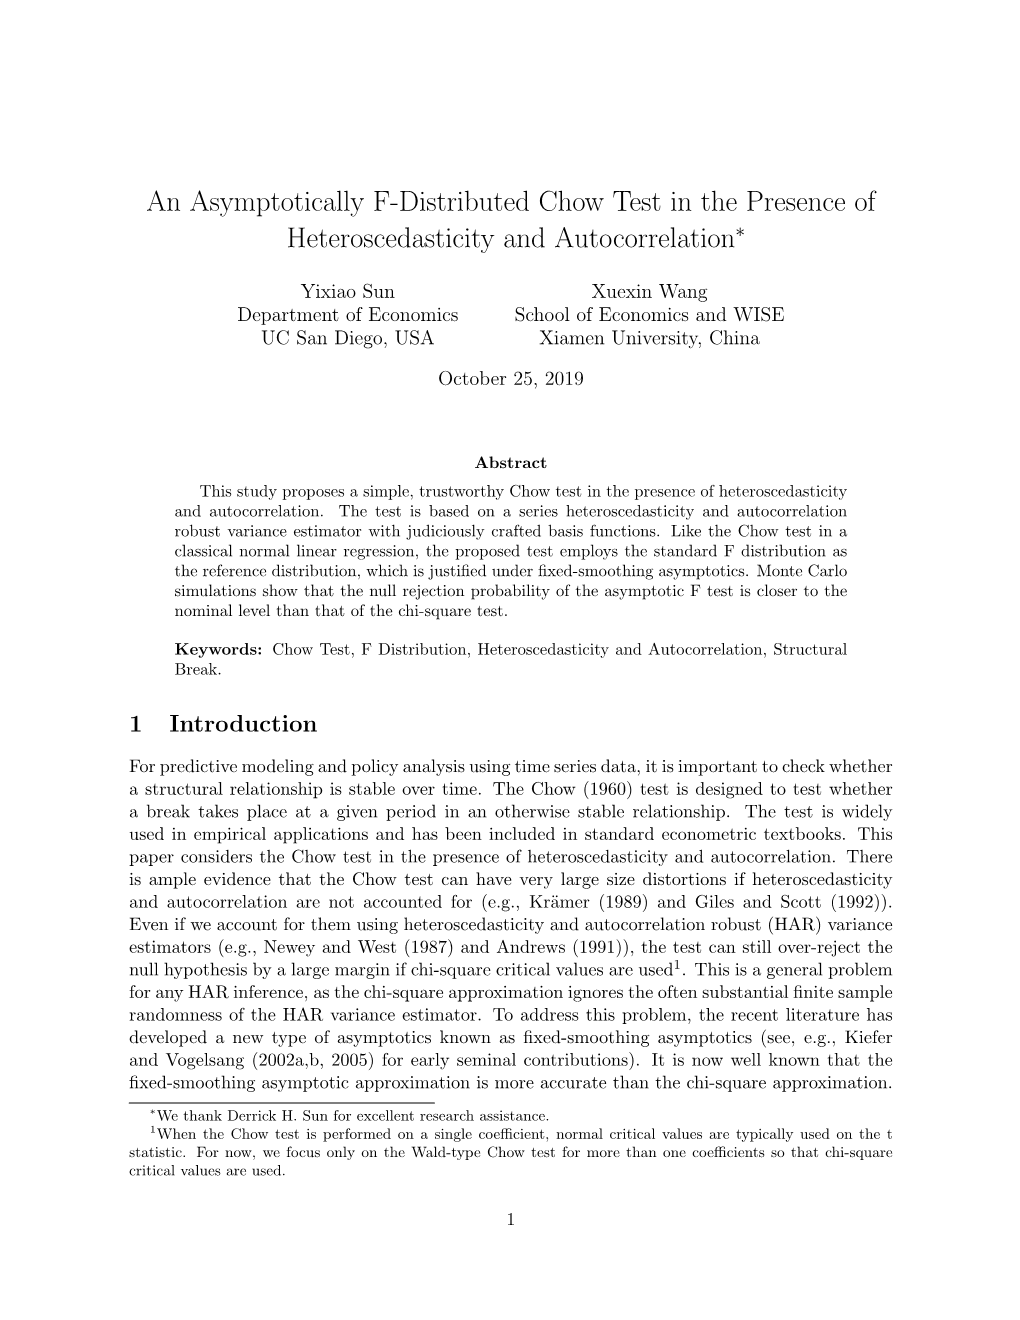 An Asymptotically F-Distributed Chow Test in the Presence of Heteroscedasticity and Autocorrelation∗